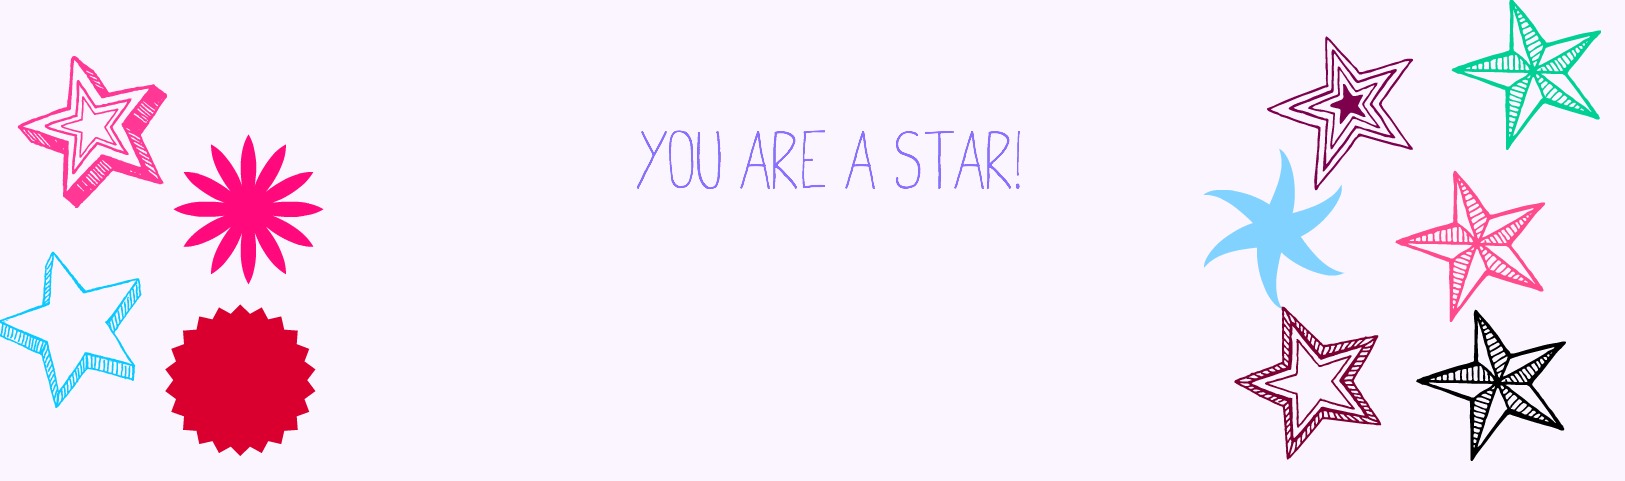 You are star